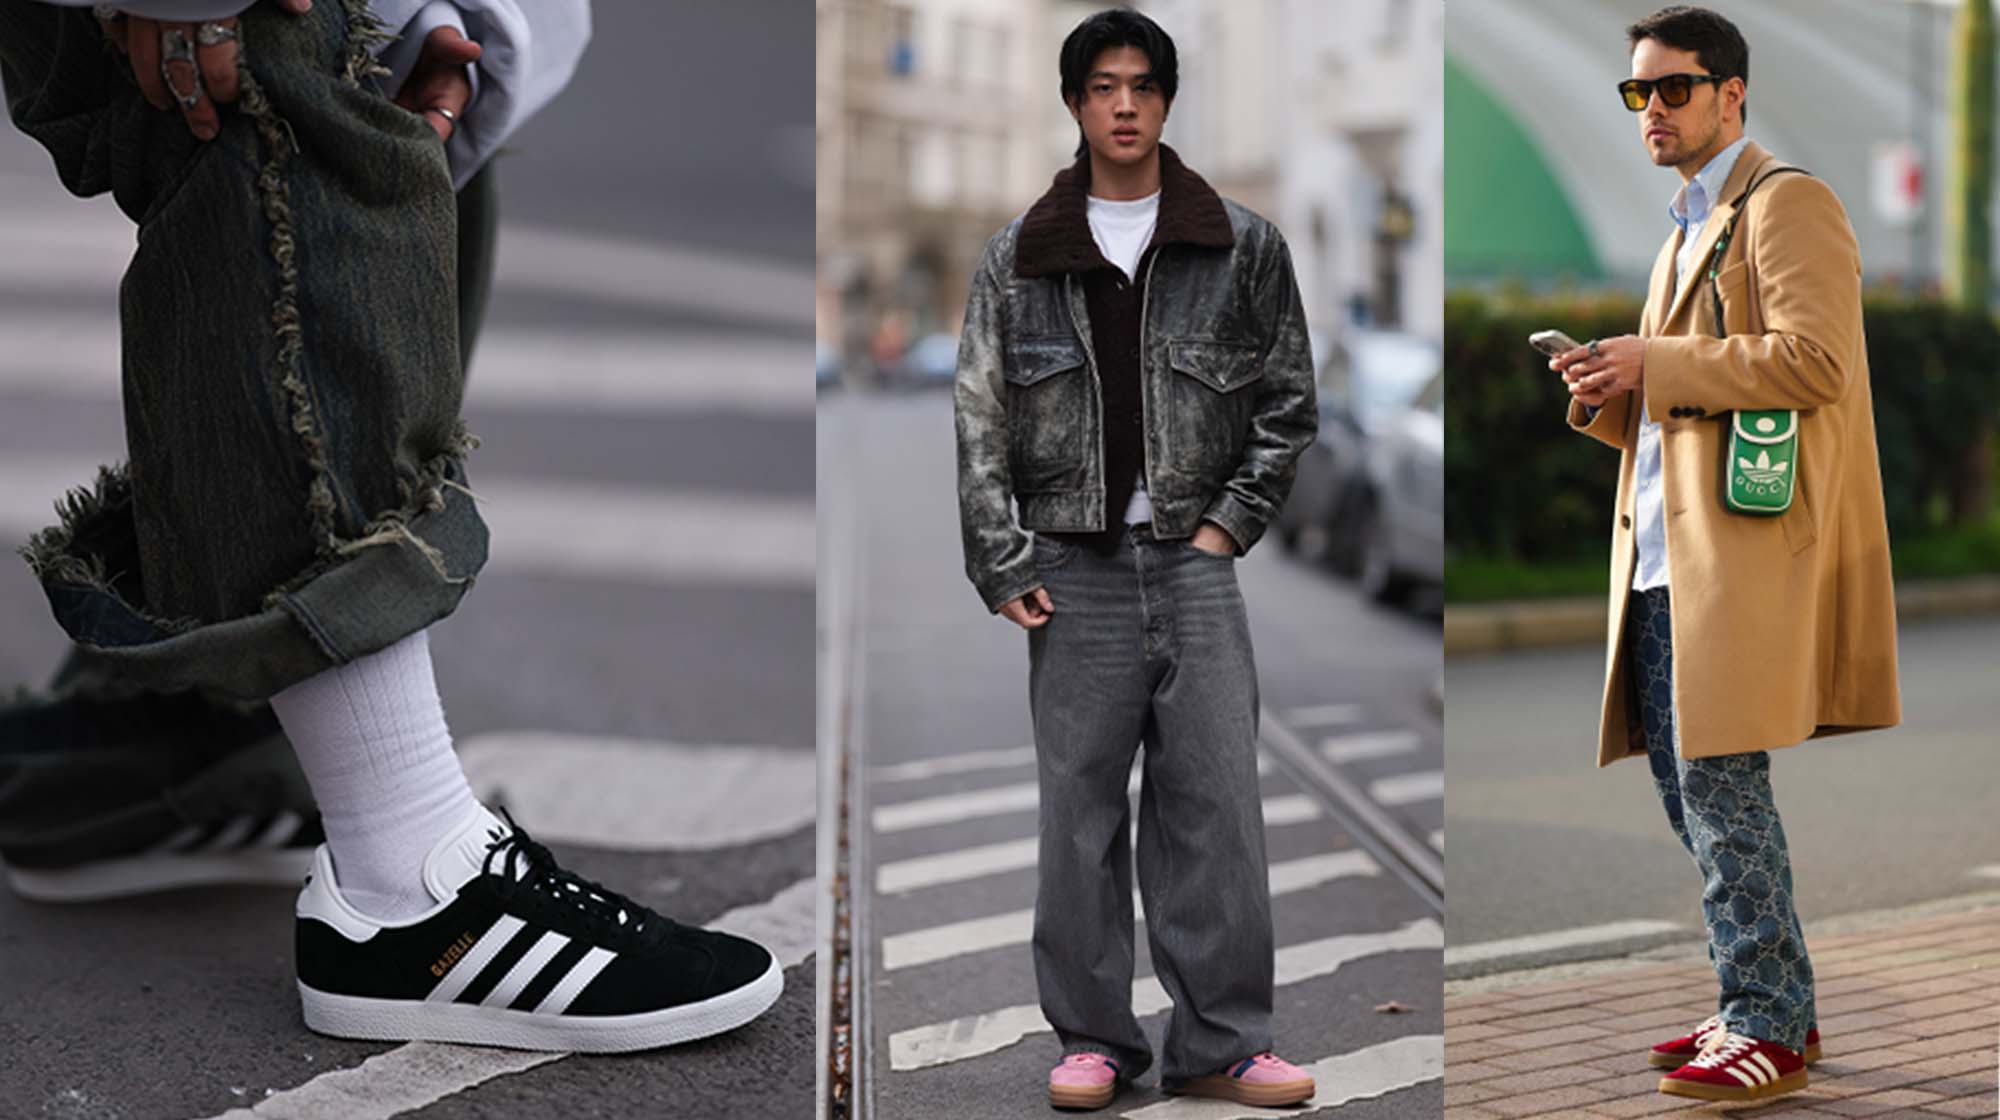 The Best adidas Gazelle Shoes Outfits for Men That Make the Retro Classics Look Ultra-Modern